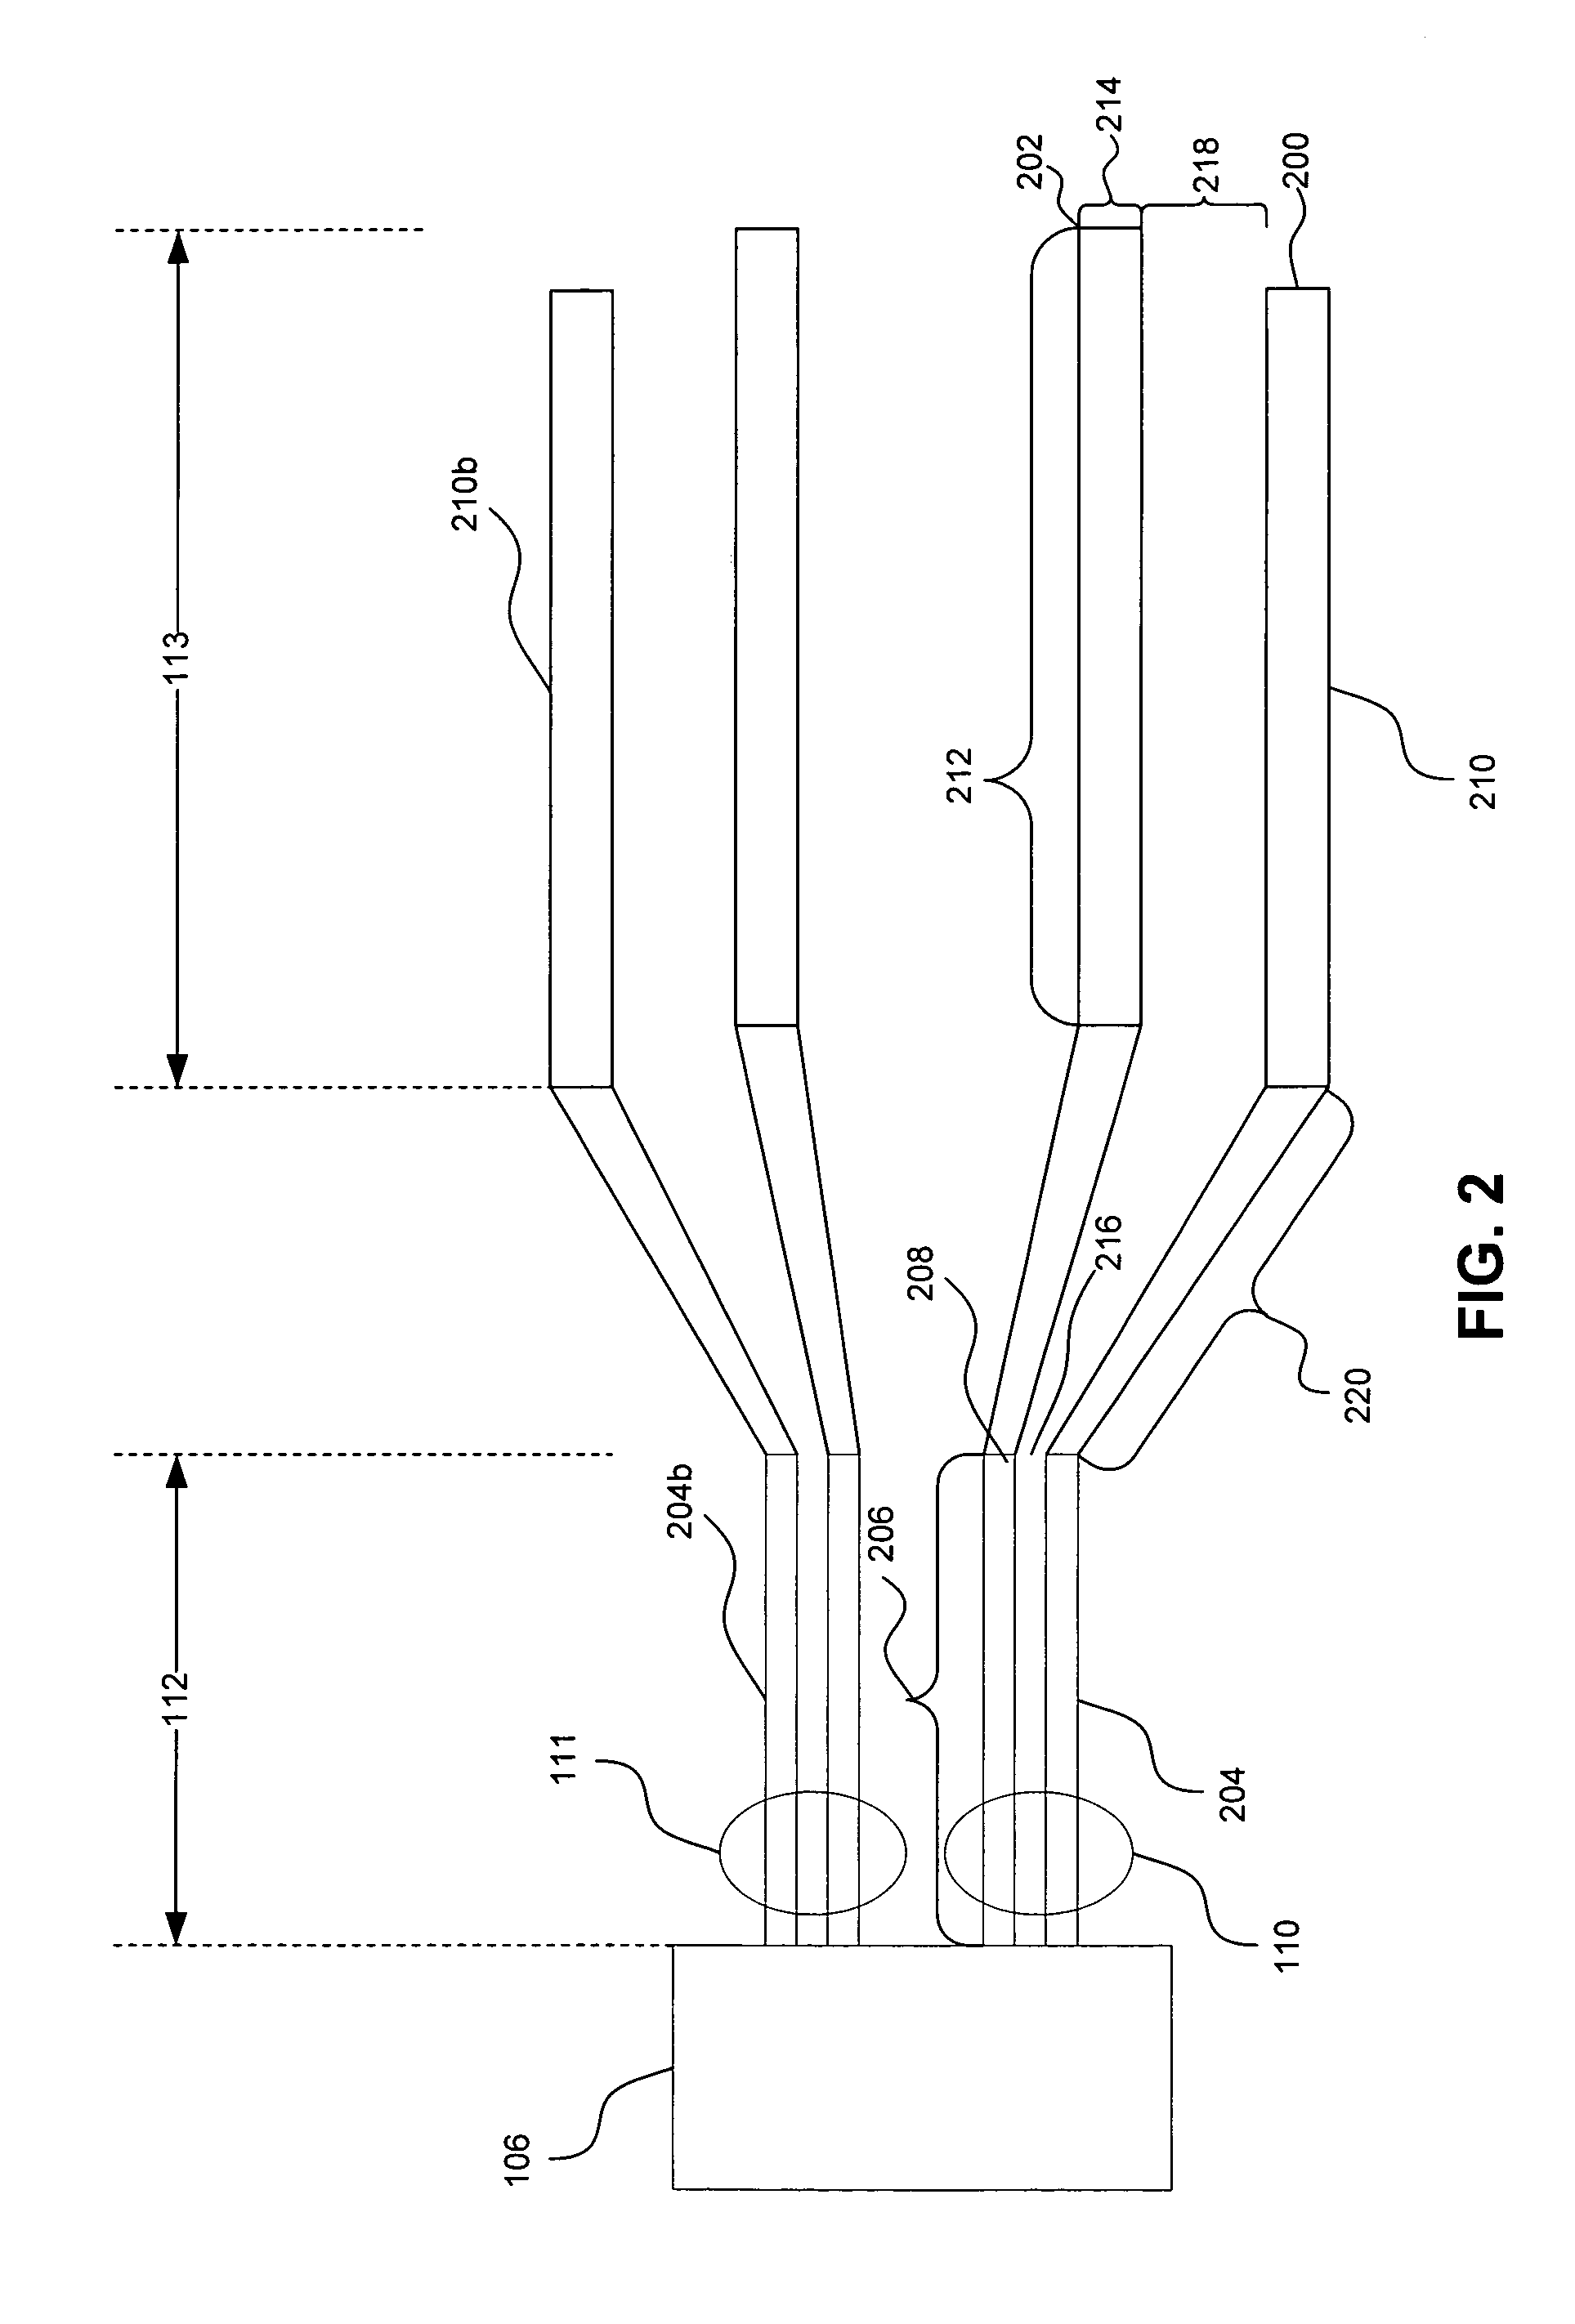 High data rate differential signal line design for uniform characteristic impedance for high performance integrated circuit packages